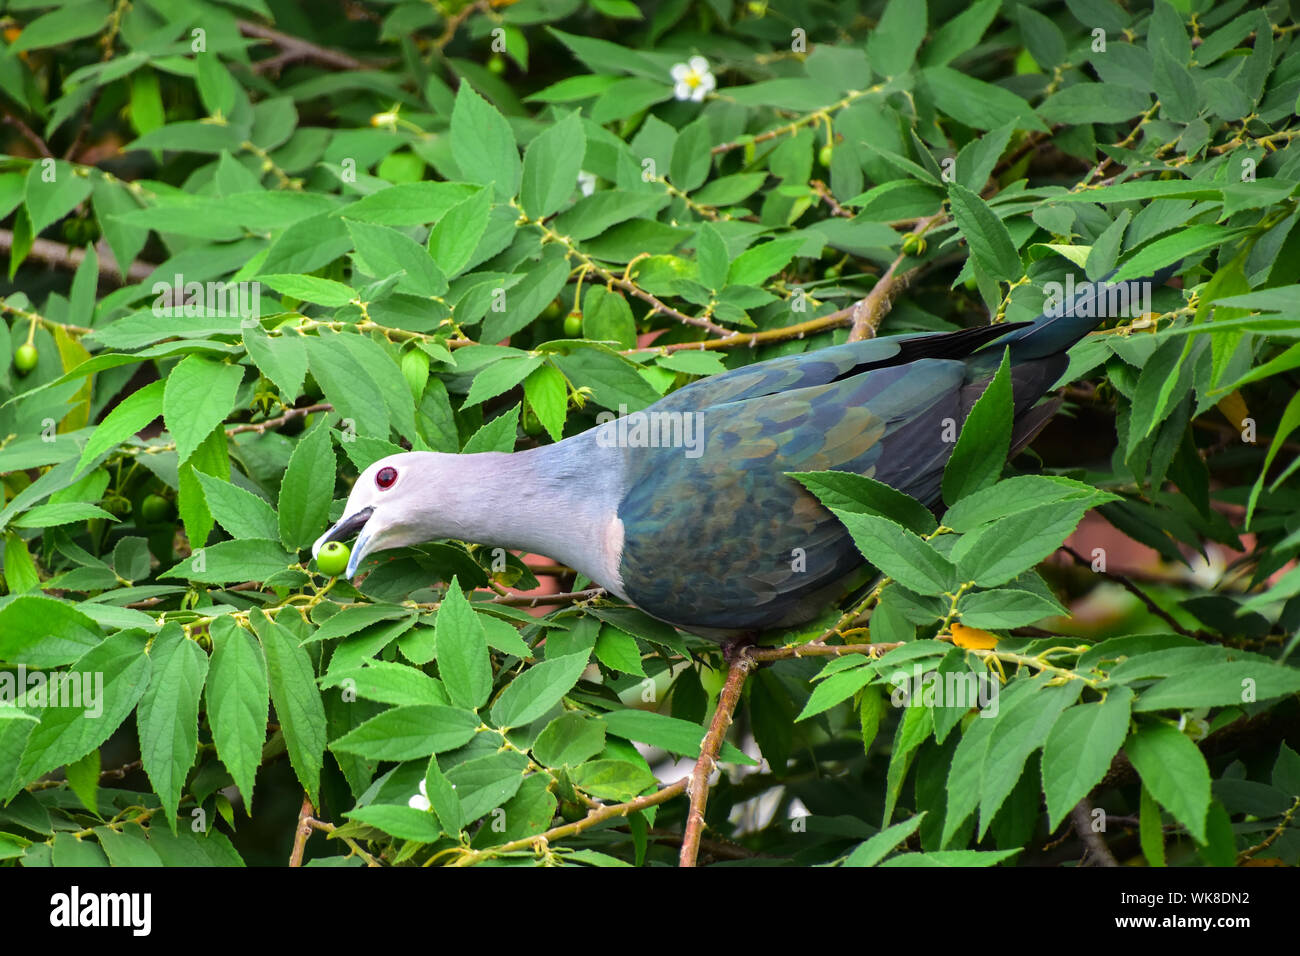 Green Imperial Pigeon, Galle Fort, Sri Lanka Stock Photo